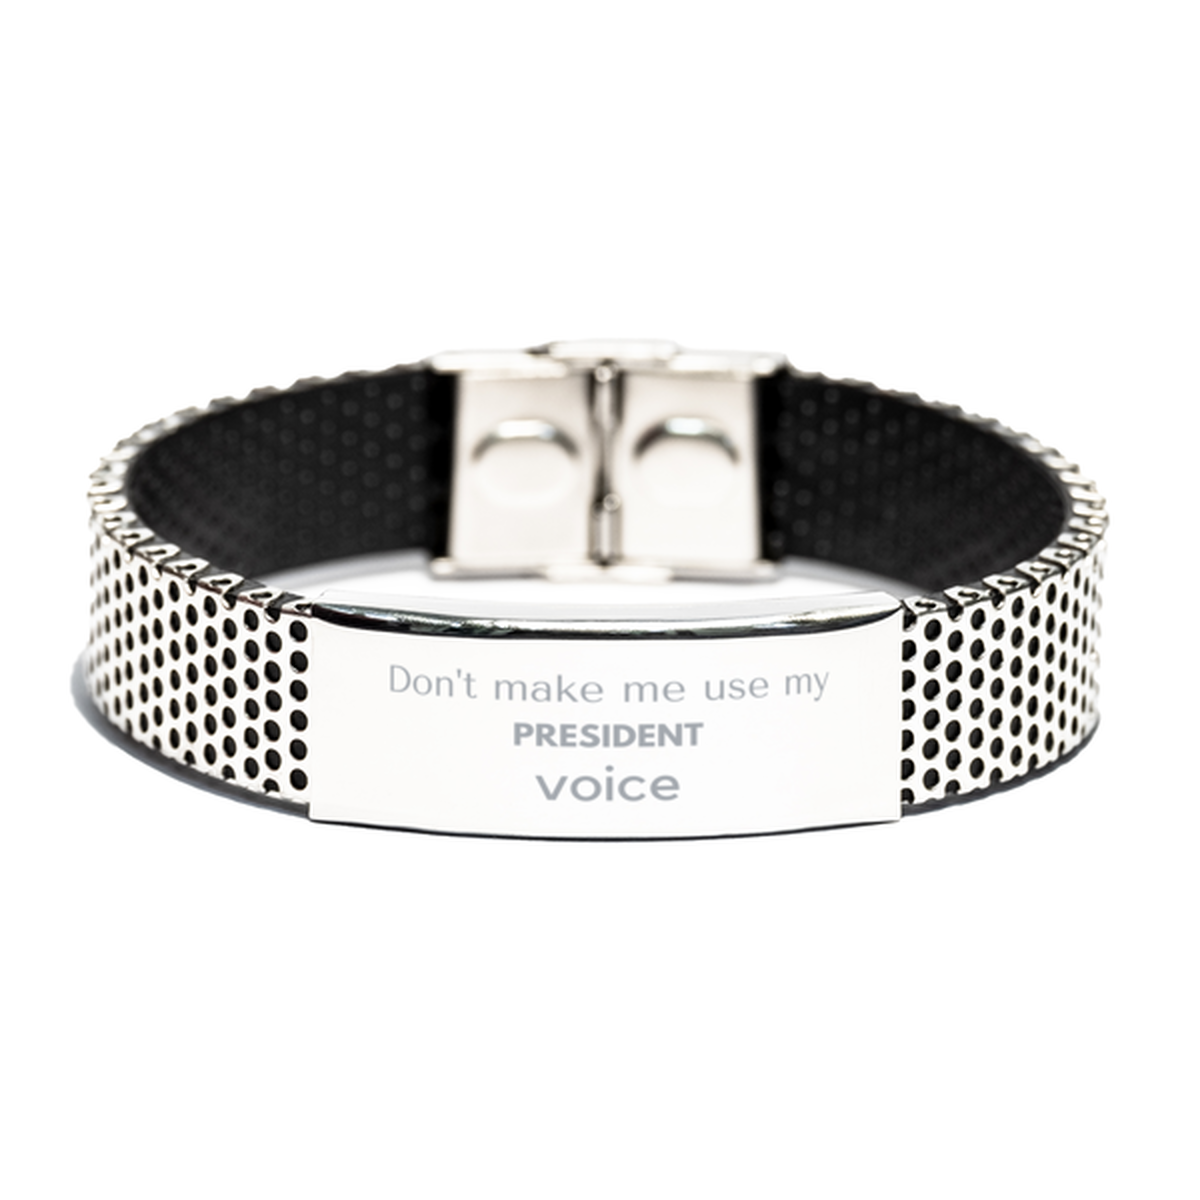 Don't make me use my President voice, Sarcasm President Gifts, Christmas President Stainless Steel Bracelet Birthday Unique Gifts For President Coworkers, Men, Women, Colleague, Friends